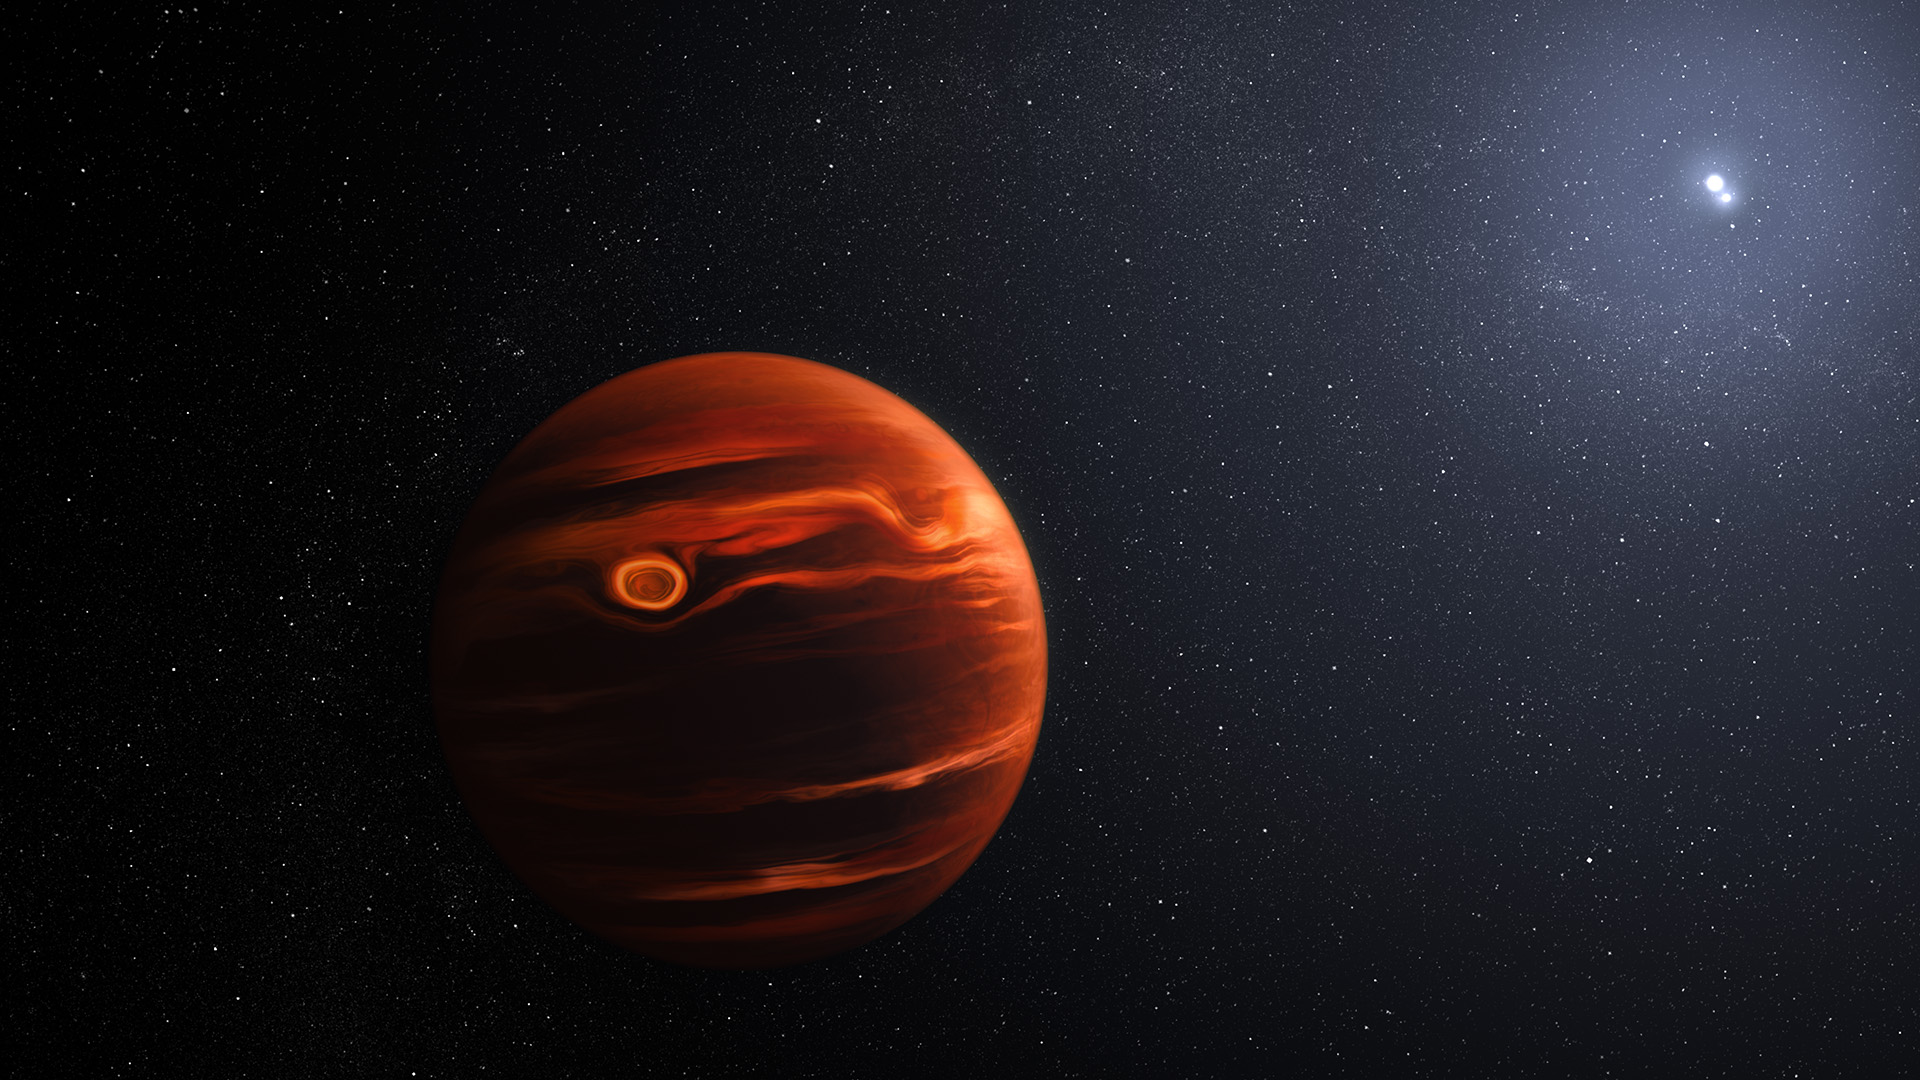 James Webb Space Telescope spies hot, gritty clouds in skies of huge exoplanet with 2 suns